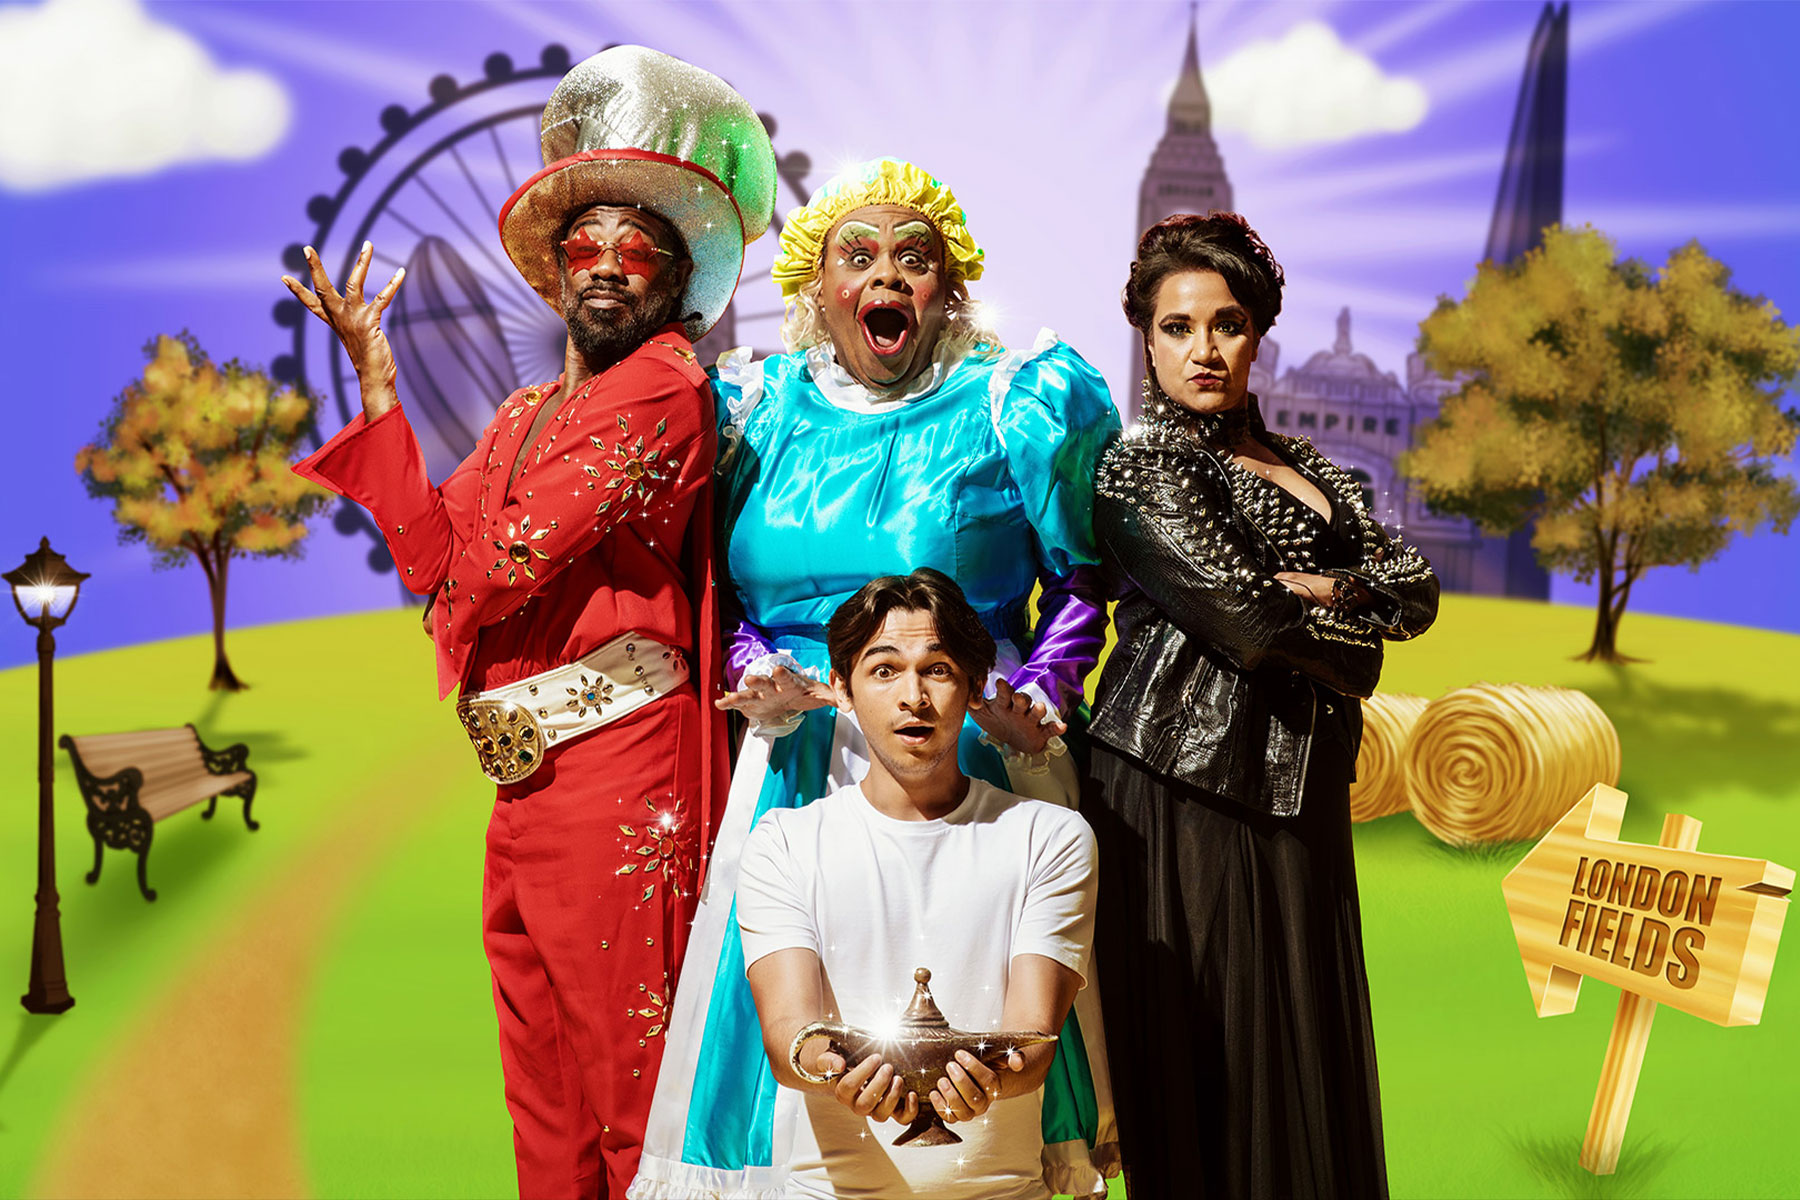 Hackney Empire pantomime Aladdin cast members in a promotional image